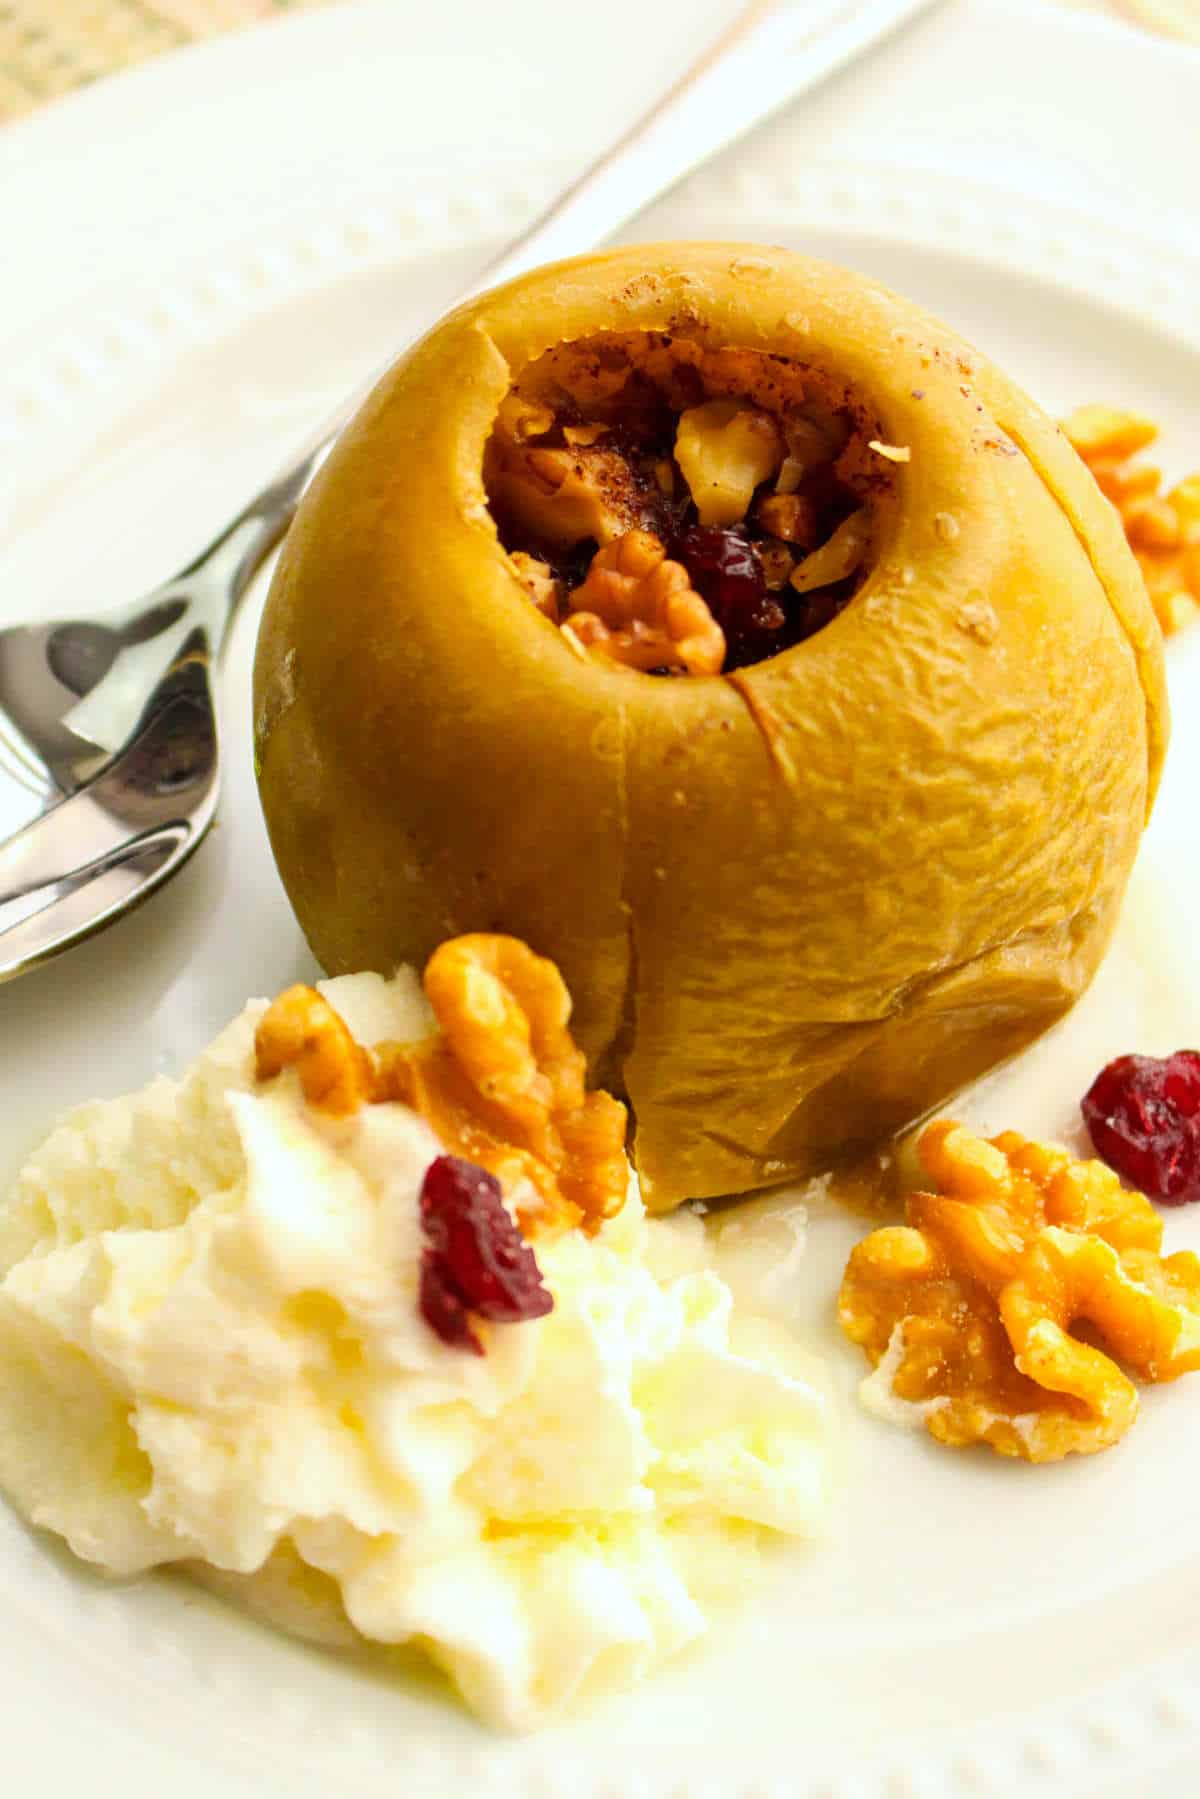 slow cooked Granny smith apple with walnuts and cranberries.